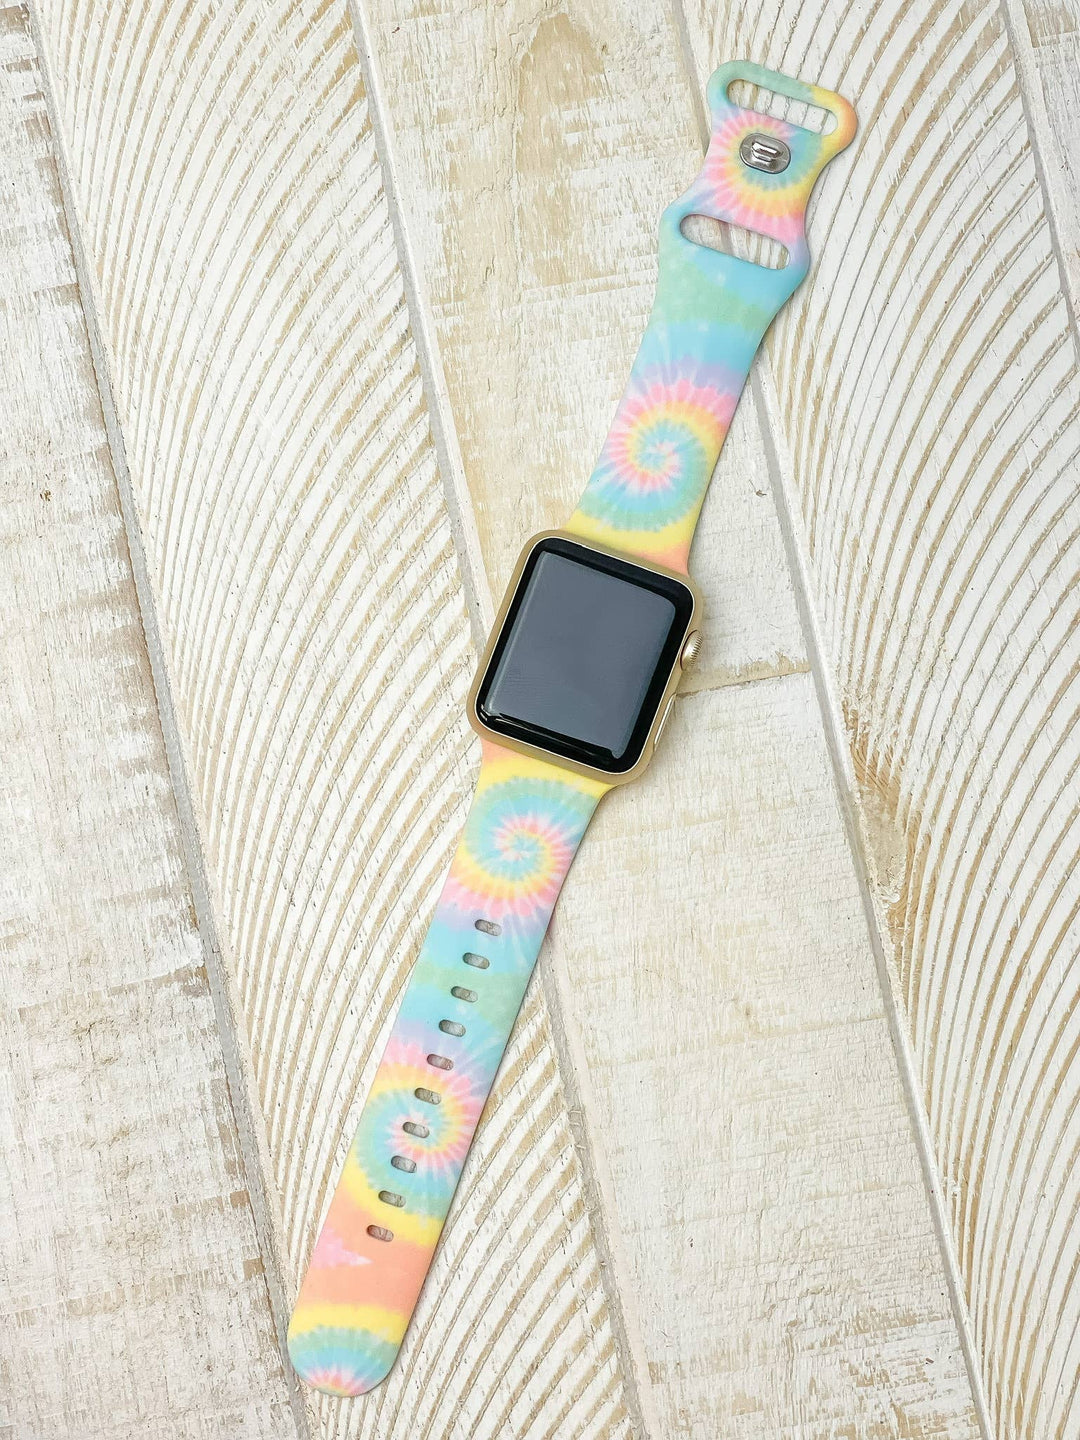 Watch Bands - Summer Tie Dye Printed Silicone Smart Watch Band - One Size